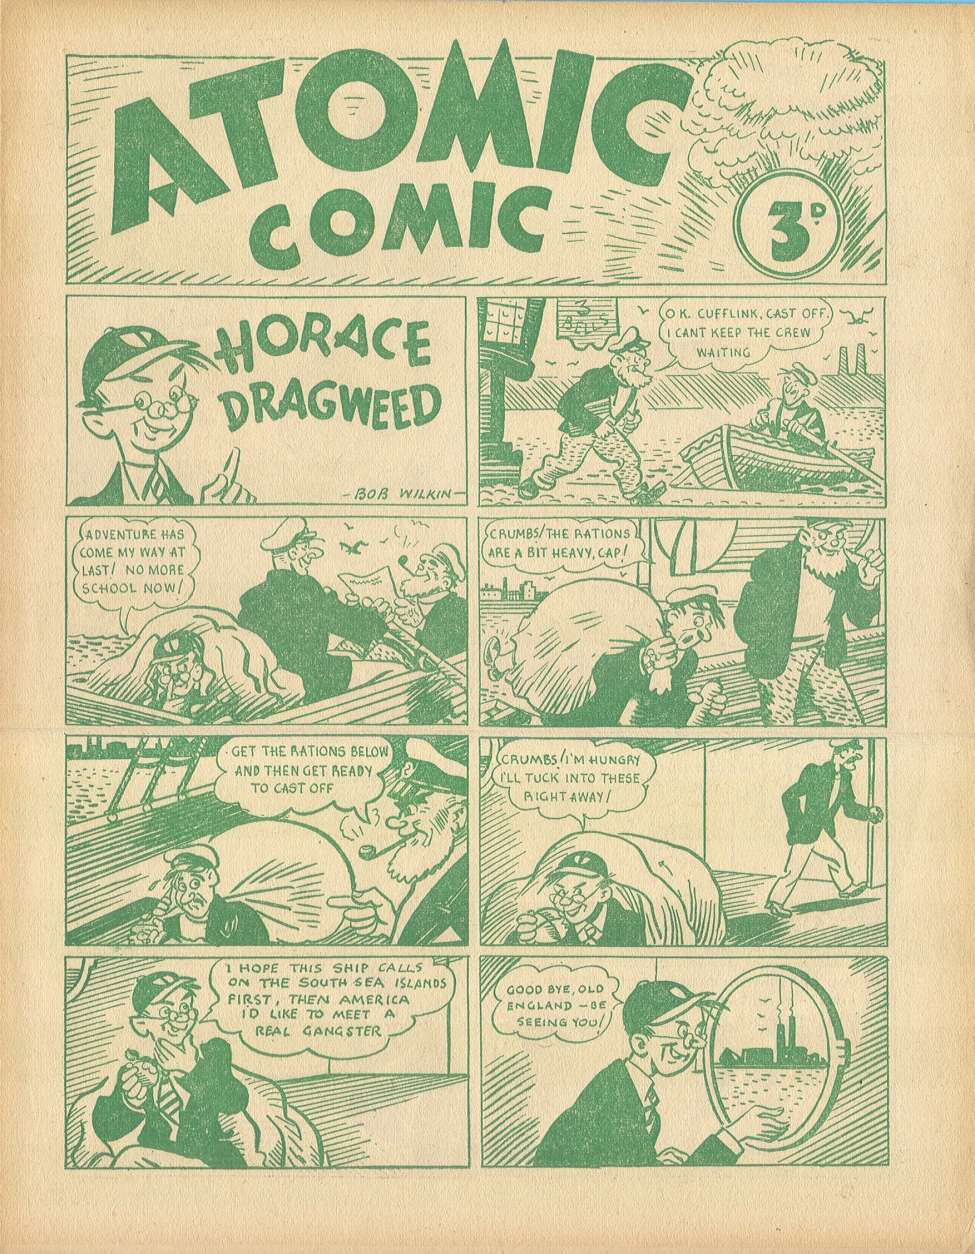 Book Cover For Atomic Comic (nn) 1949